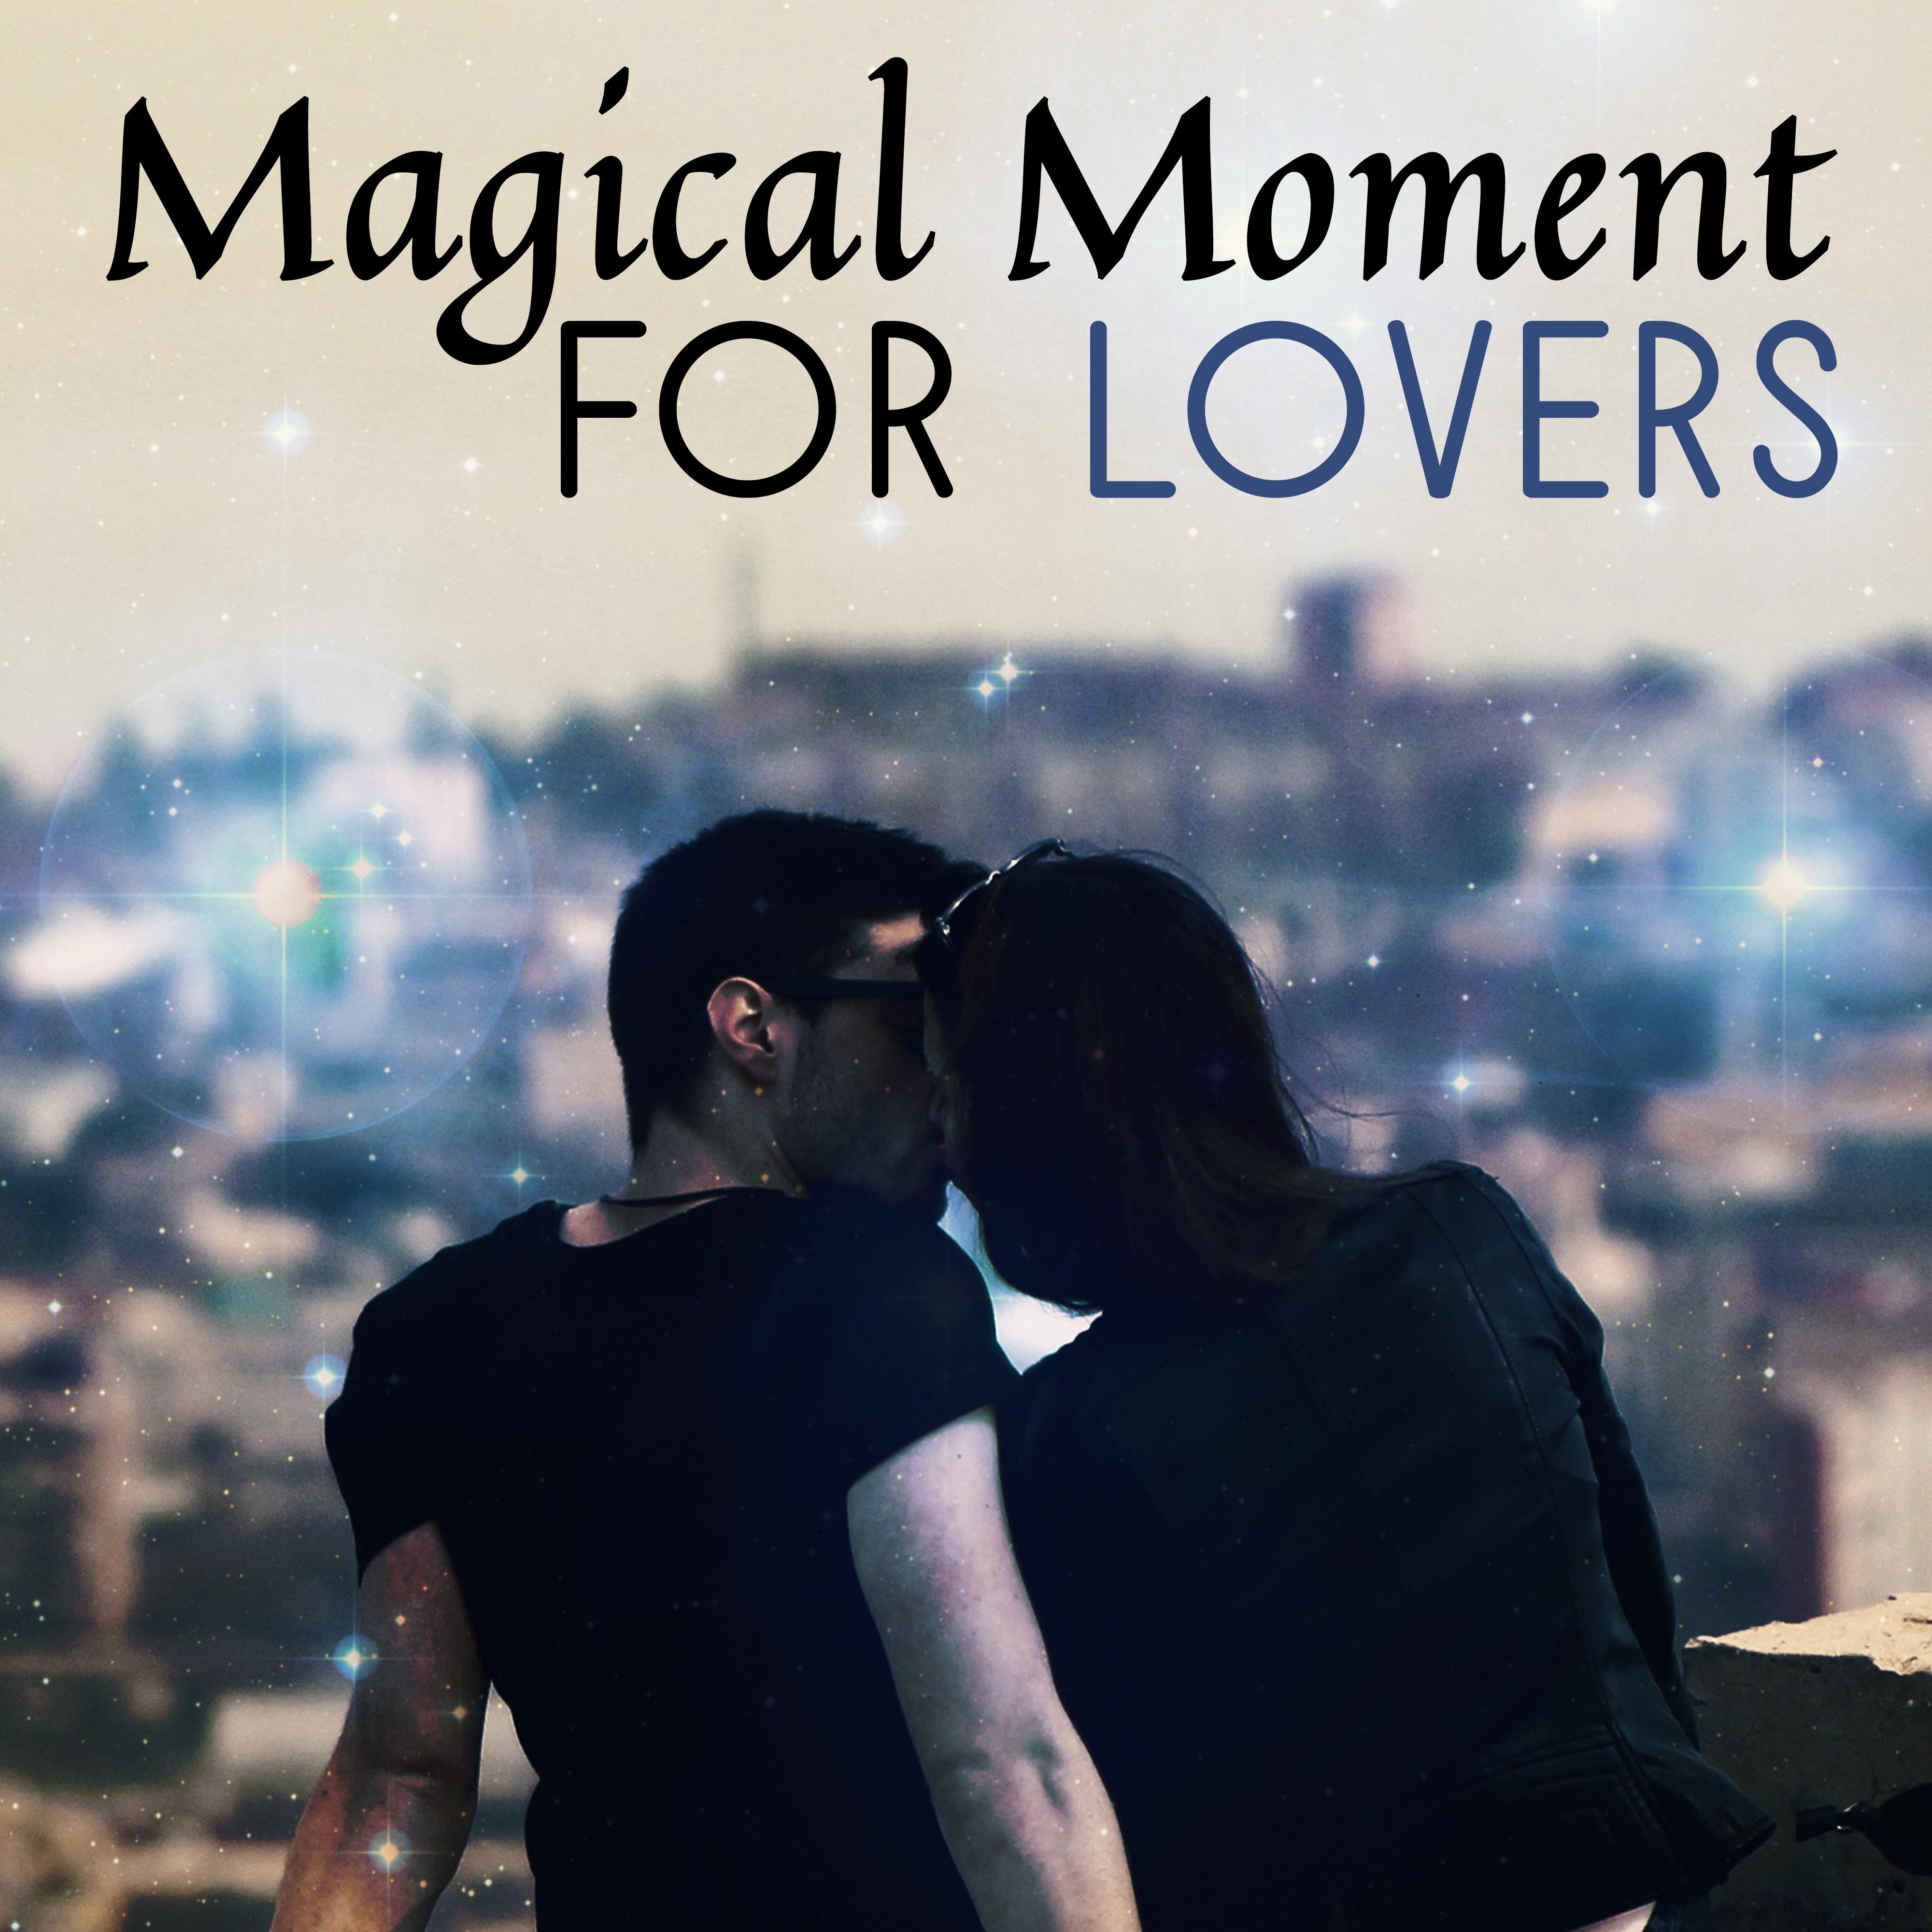 Magical Moment for Lovers – Romantic Date, Smooth Jazz for Relaxation, Dinner by Candlelight, Sexy Jazz, Romantic Dance